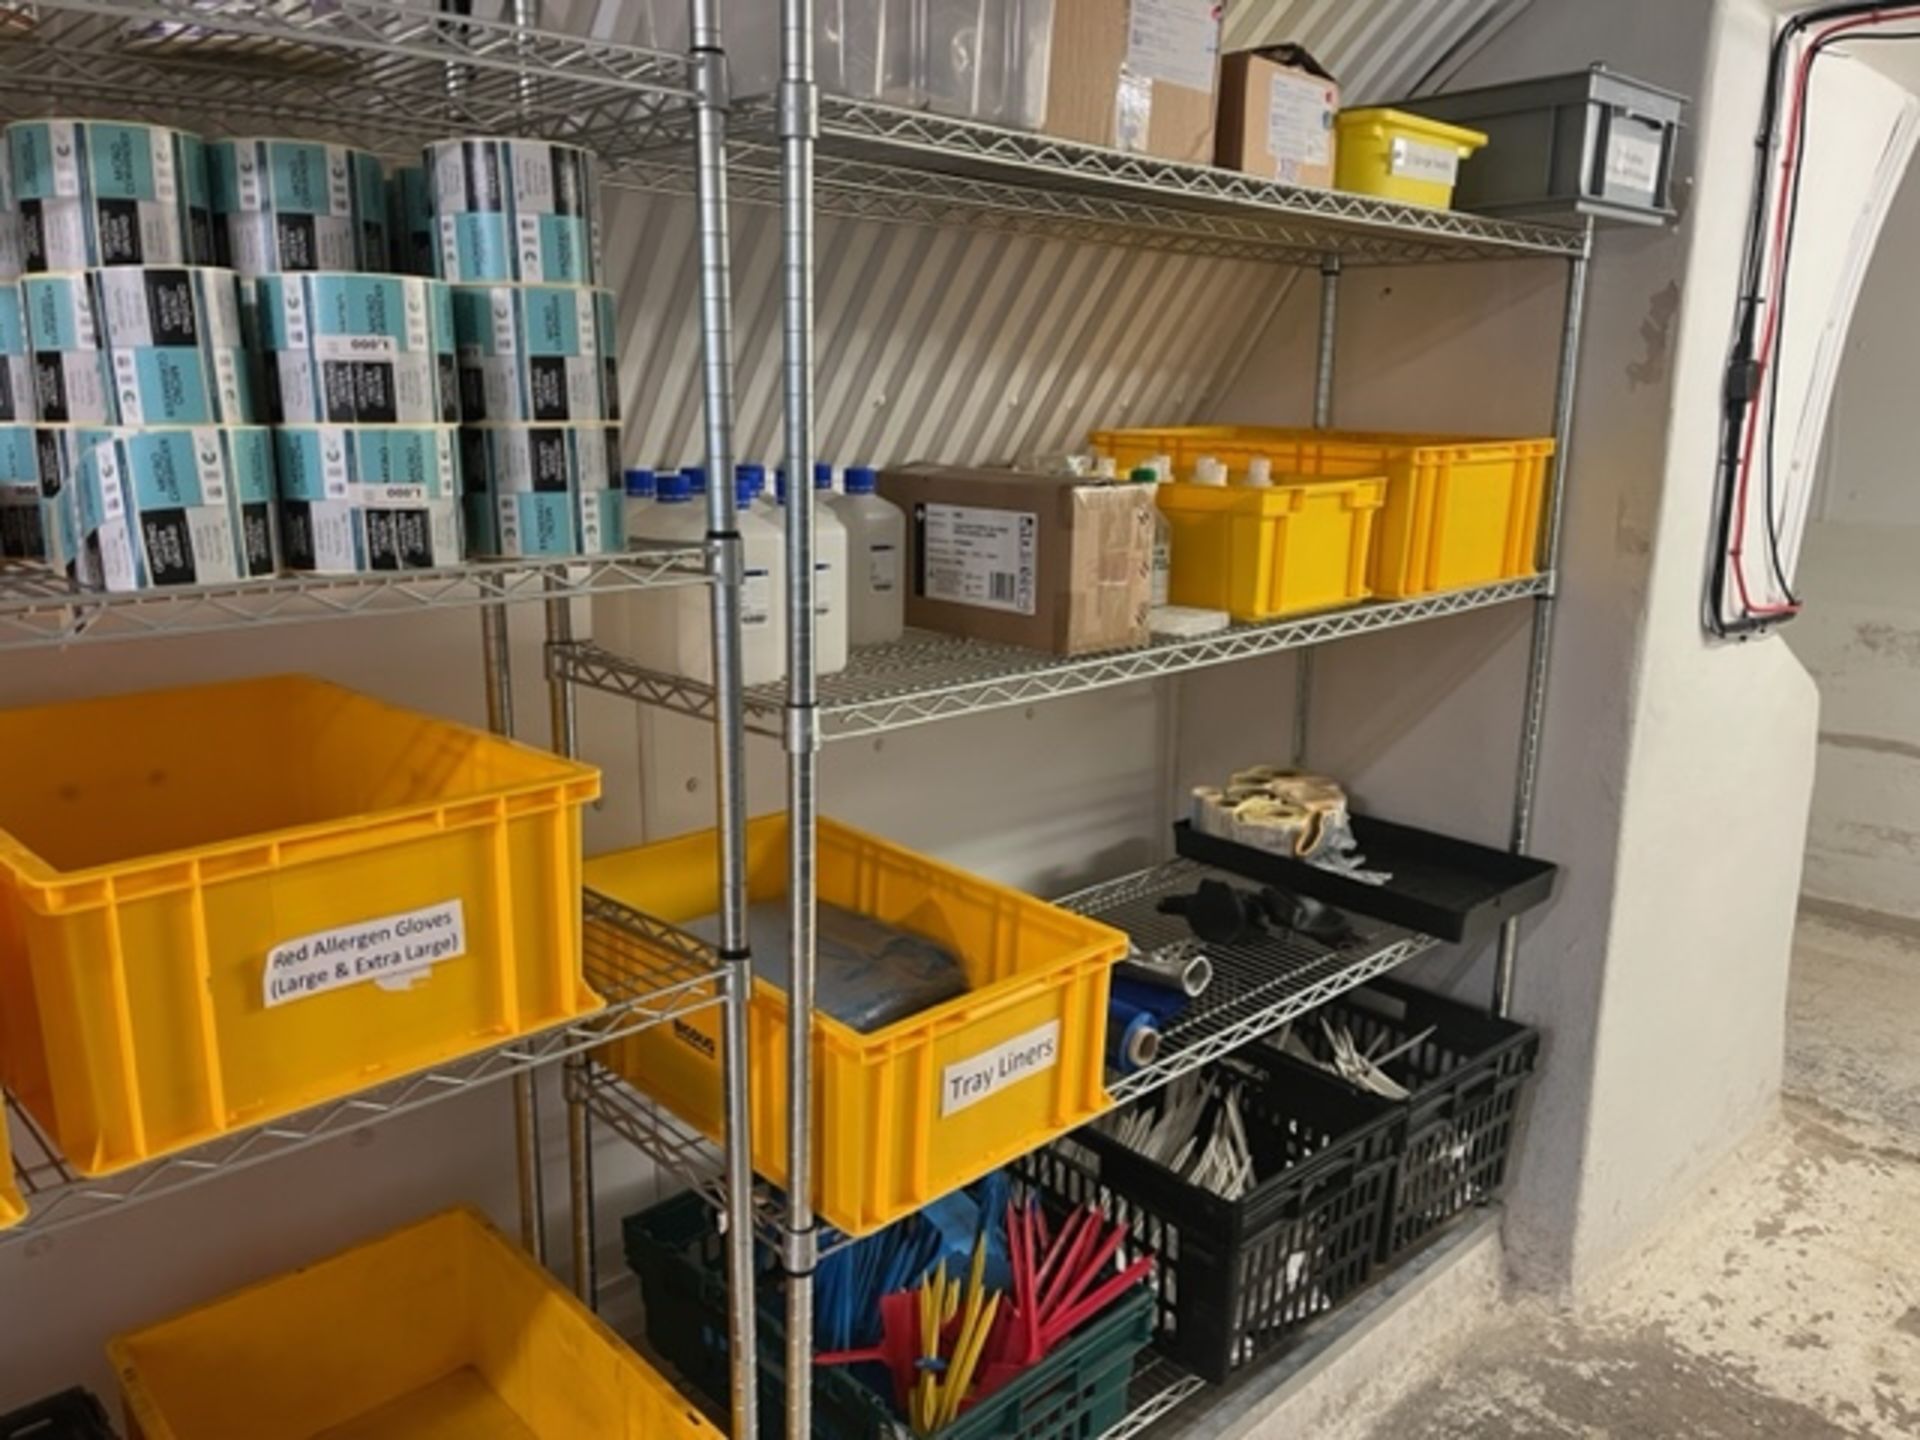 2 X 4 SHELF METAL RACKING INCLUDING CONTENTS (GLOVES, LABELS ETC) - Image 2 of 2